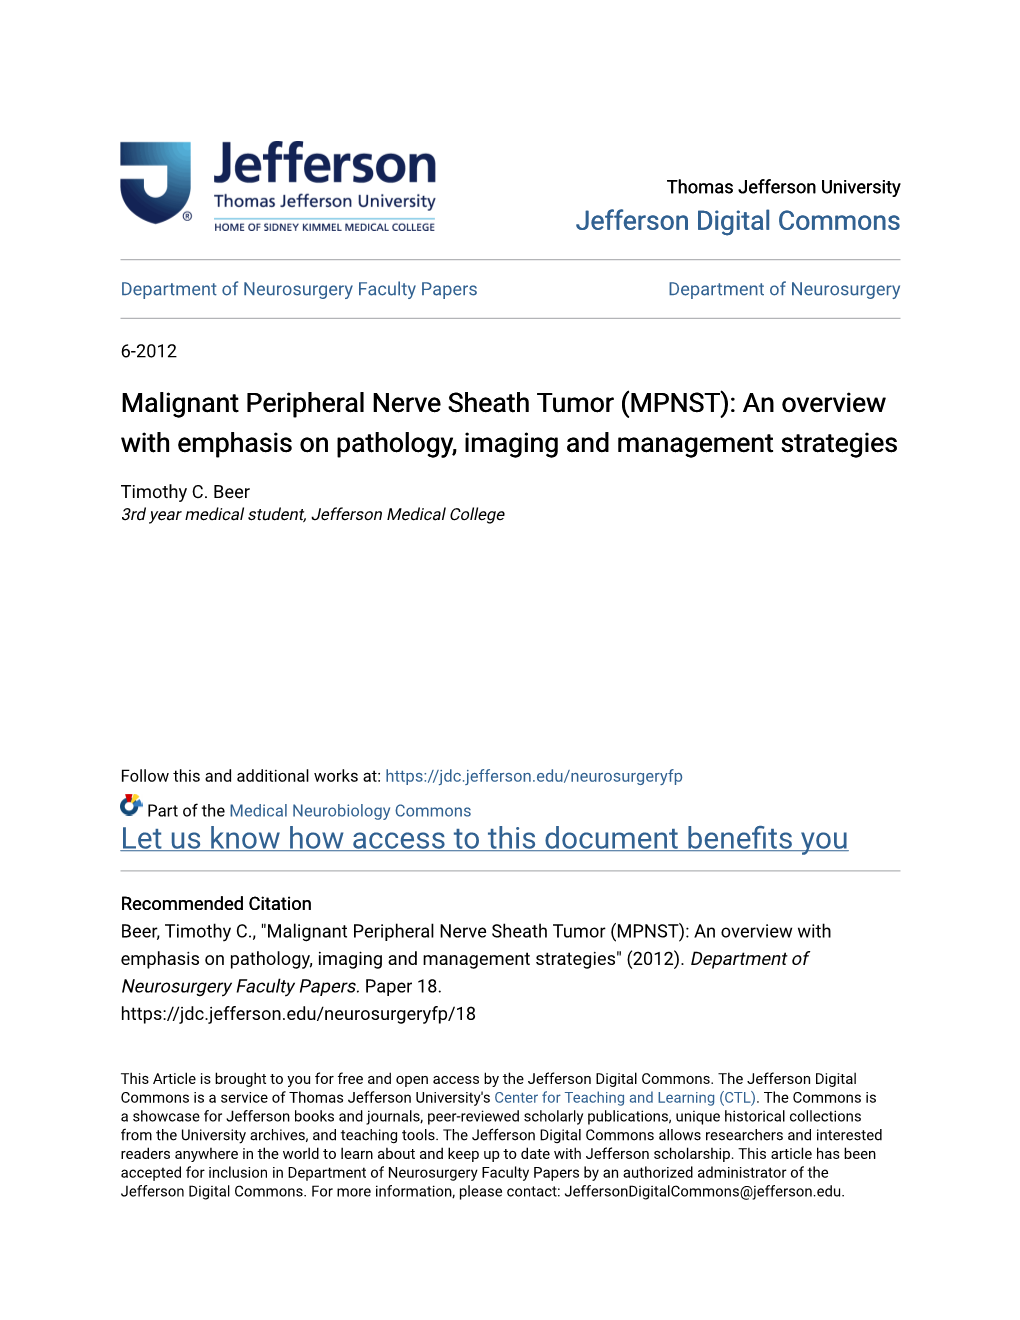 Malignant Peripheral Nerve Sheath Tumor (MPNST): an Overview with Emphasis on Pathology, Imaging and Management Strategies